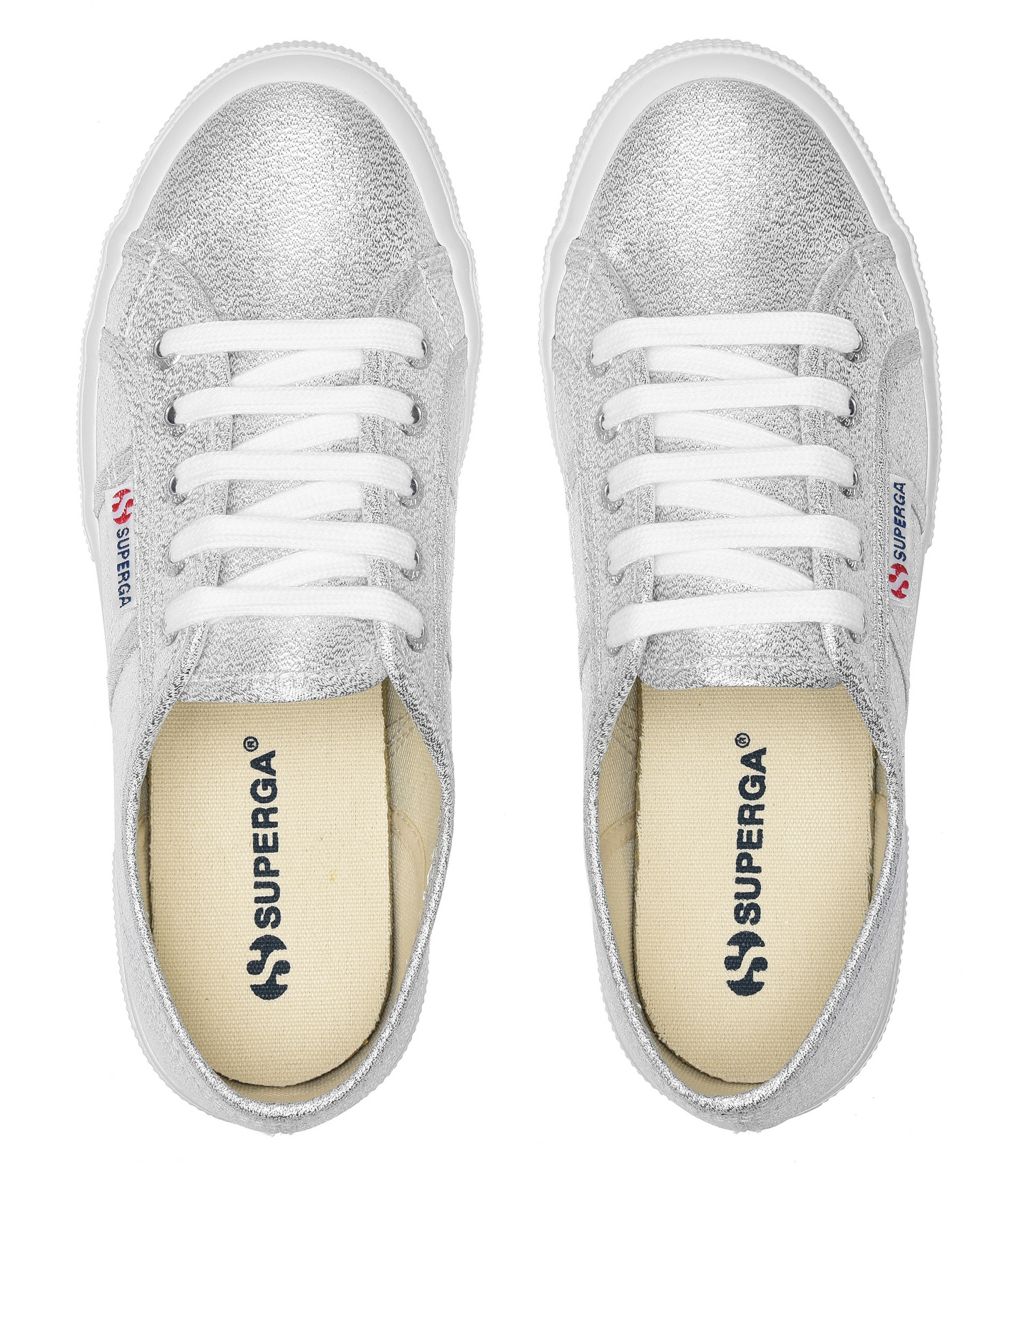 Women's Silver Trainers, Silver Canvas & Slip On Trainers